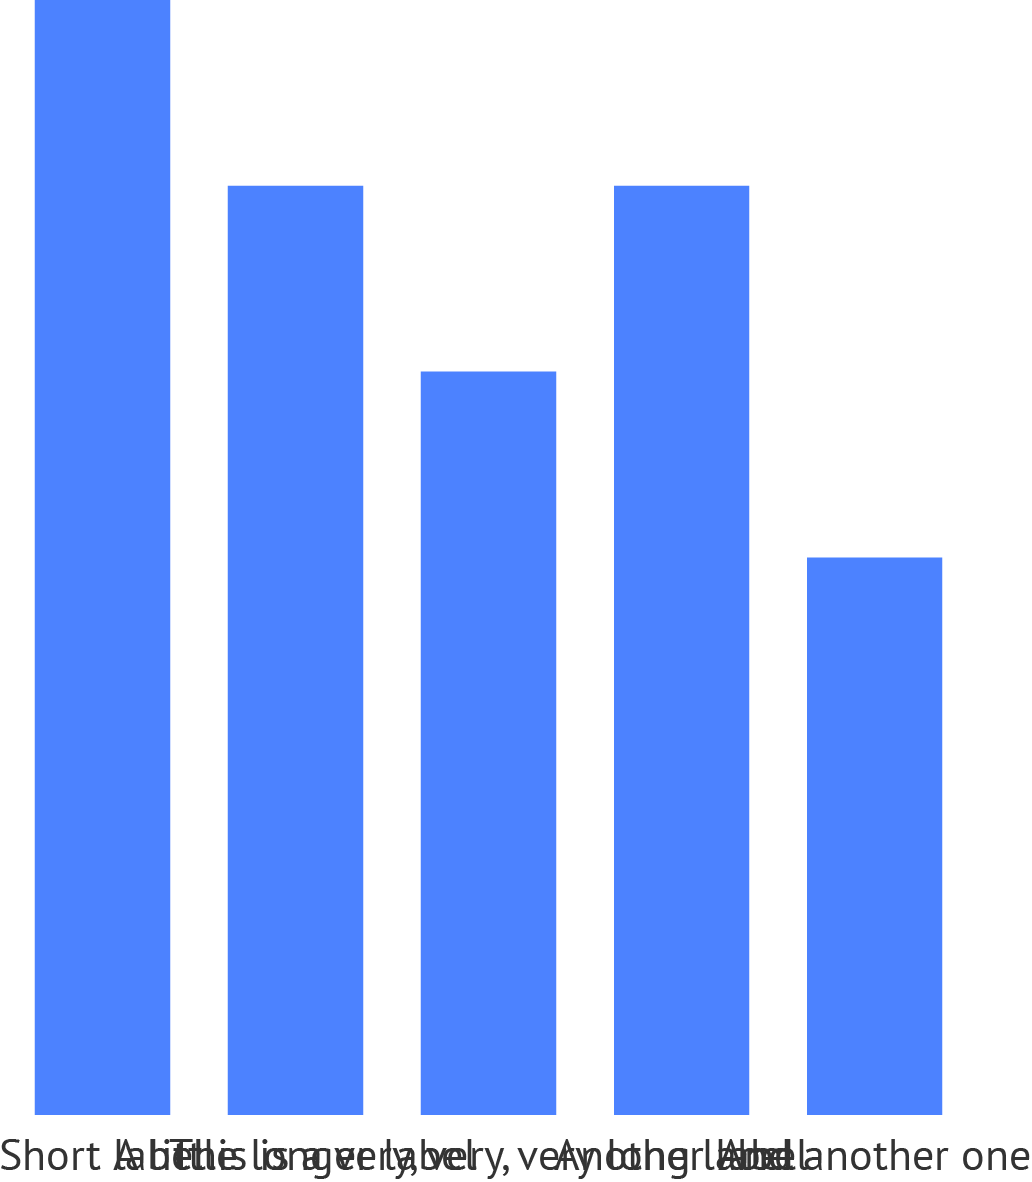 A vertical bar chart with overlapping labels